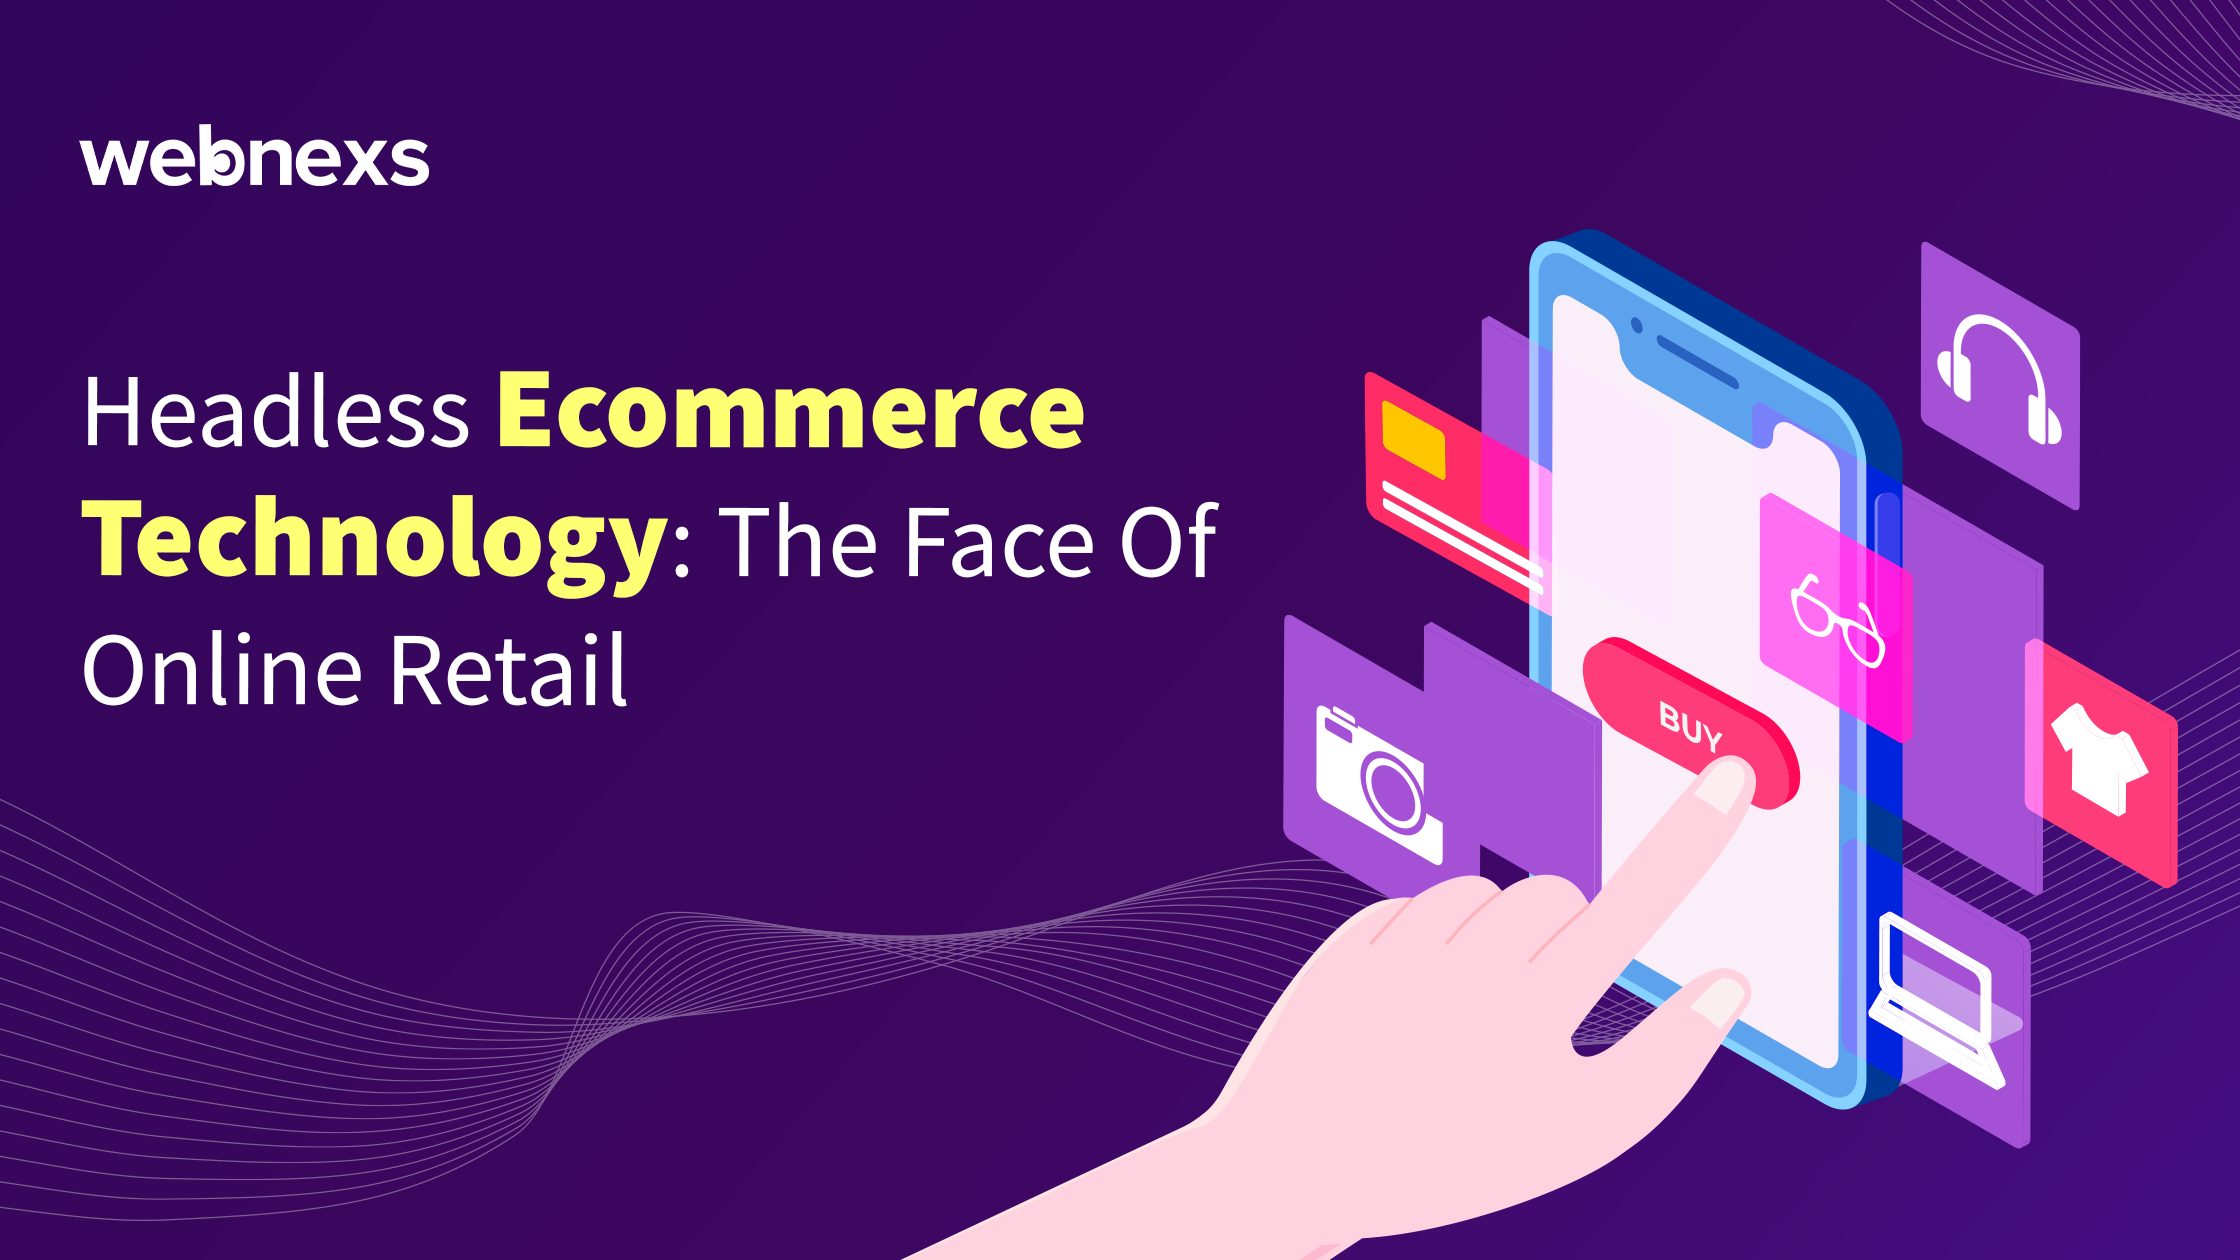 Headless Technology Definition: The new way for Commerce Business